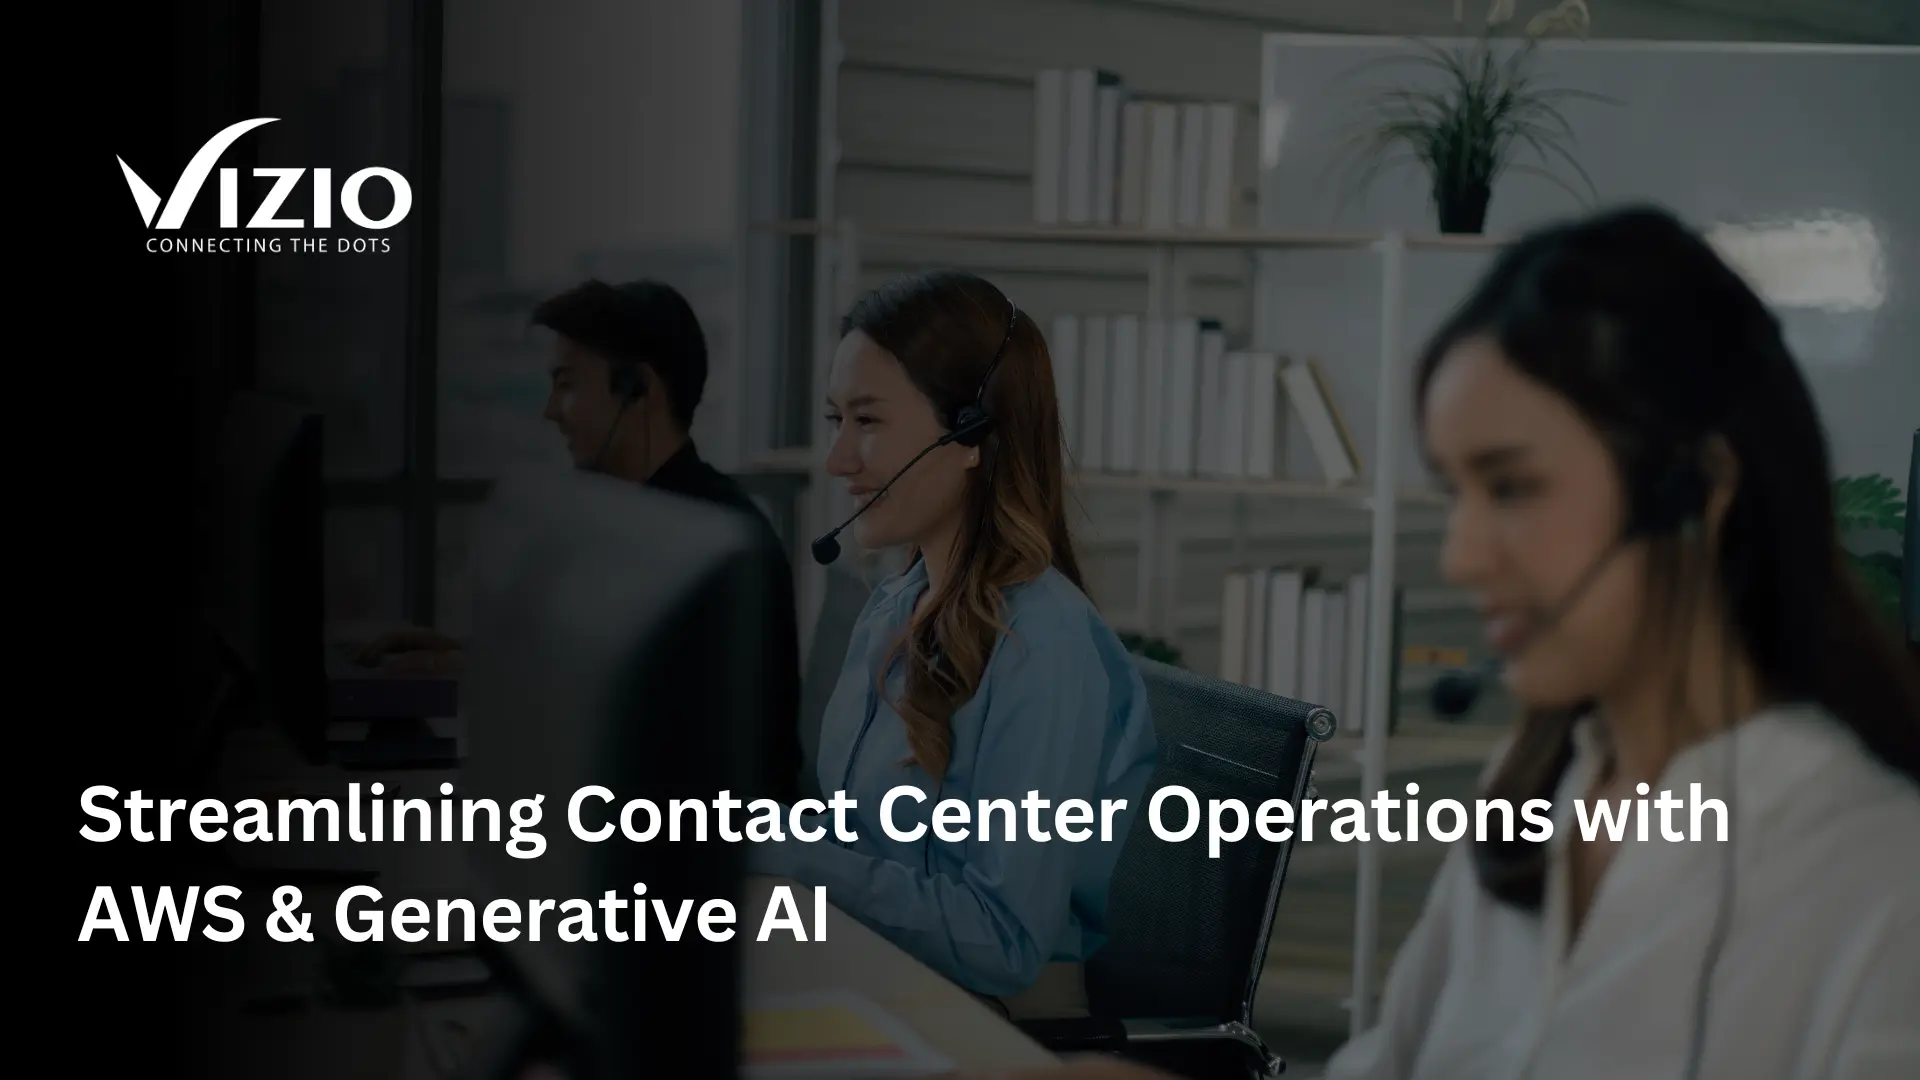 Streamlining Contact Center Operations with AWS & Generative AI